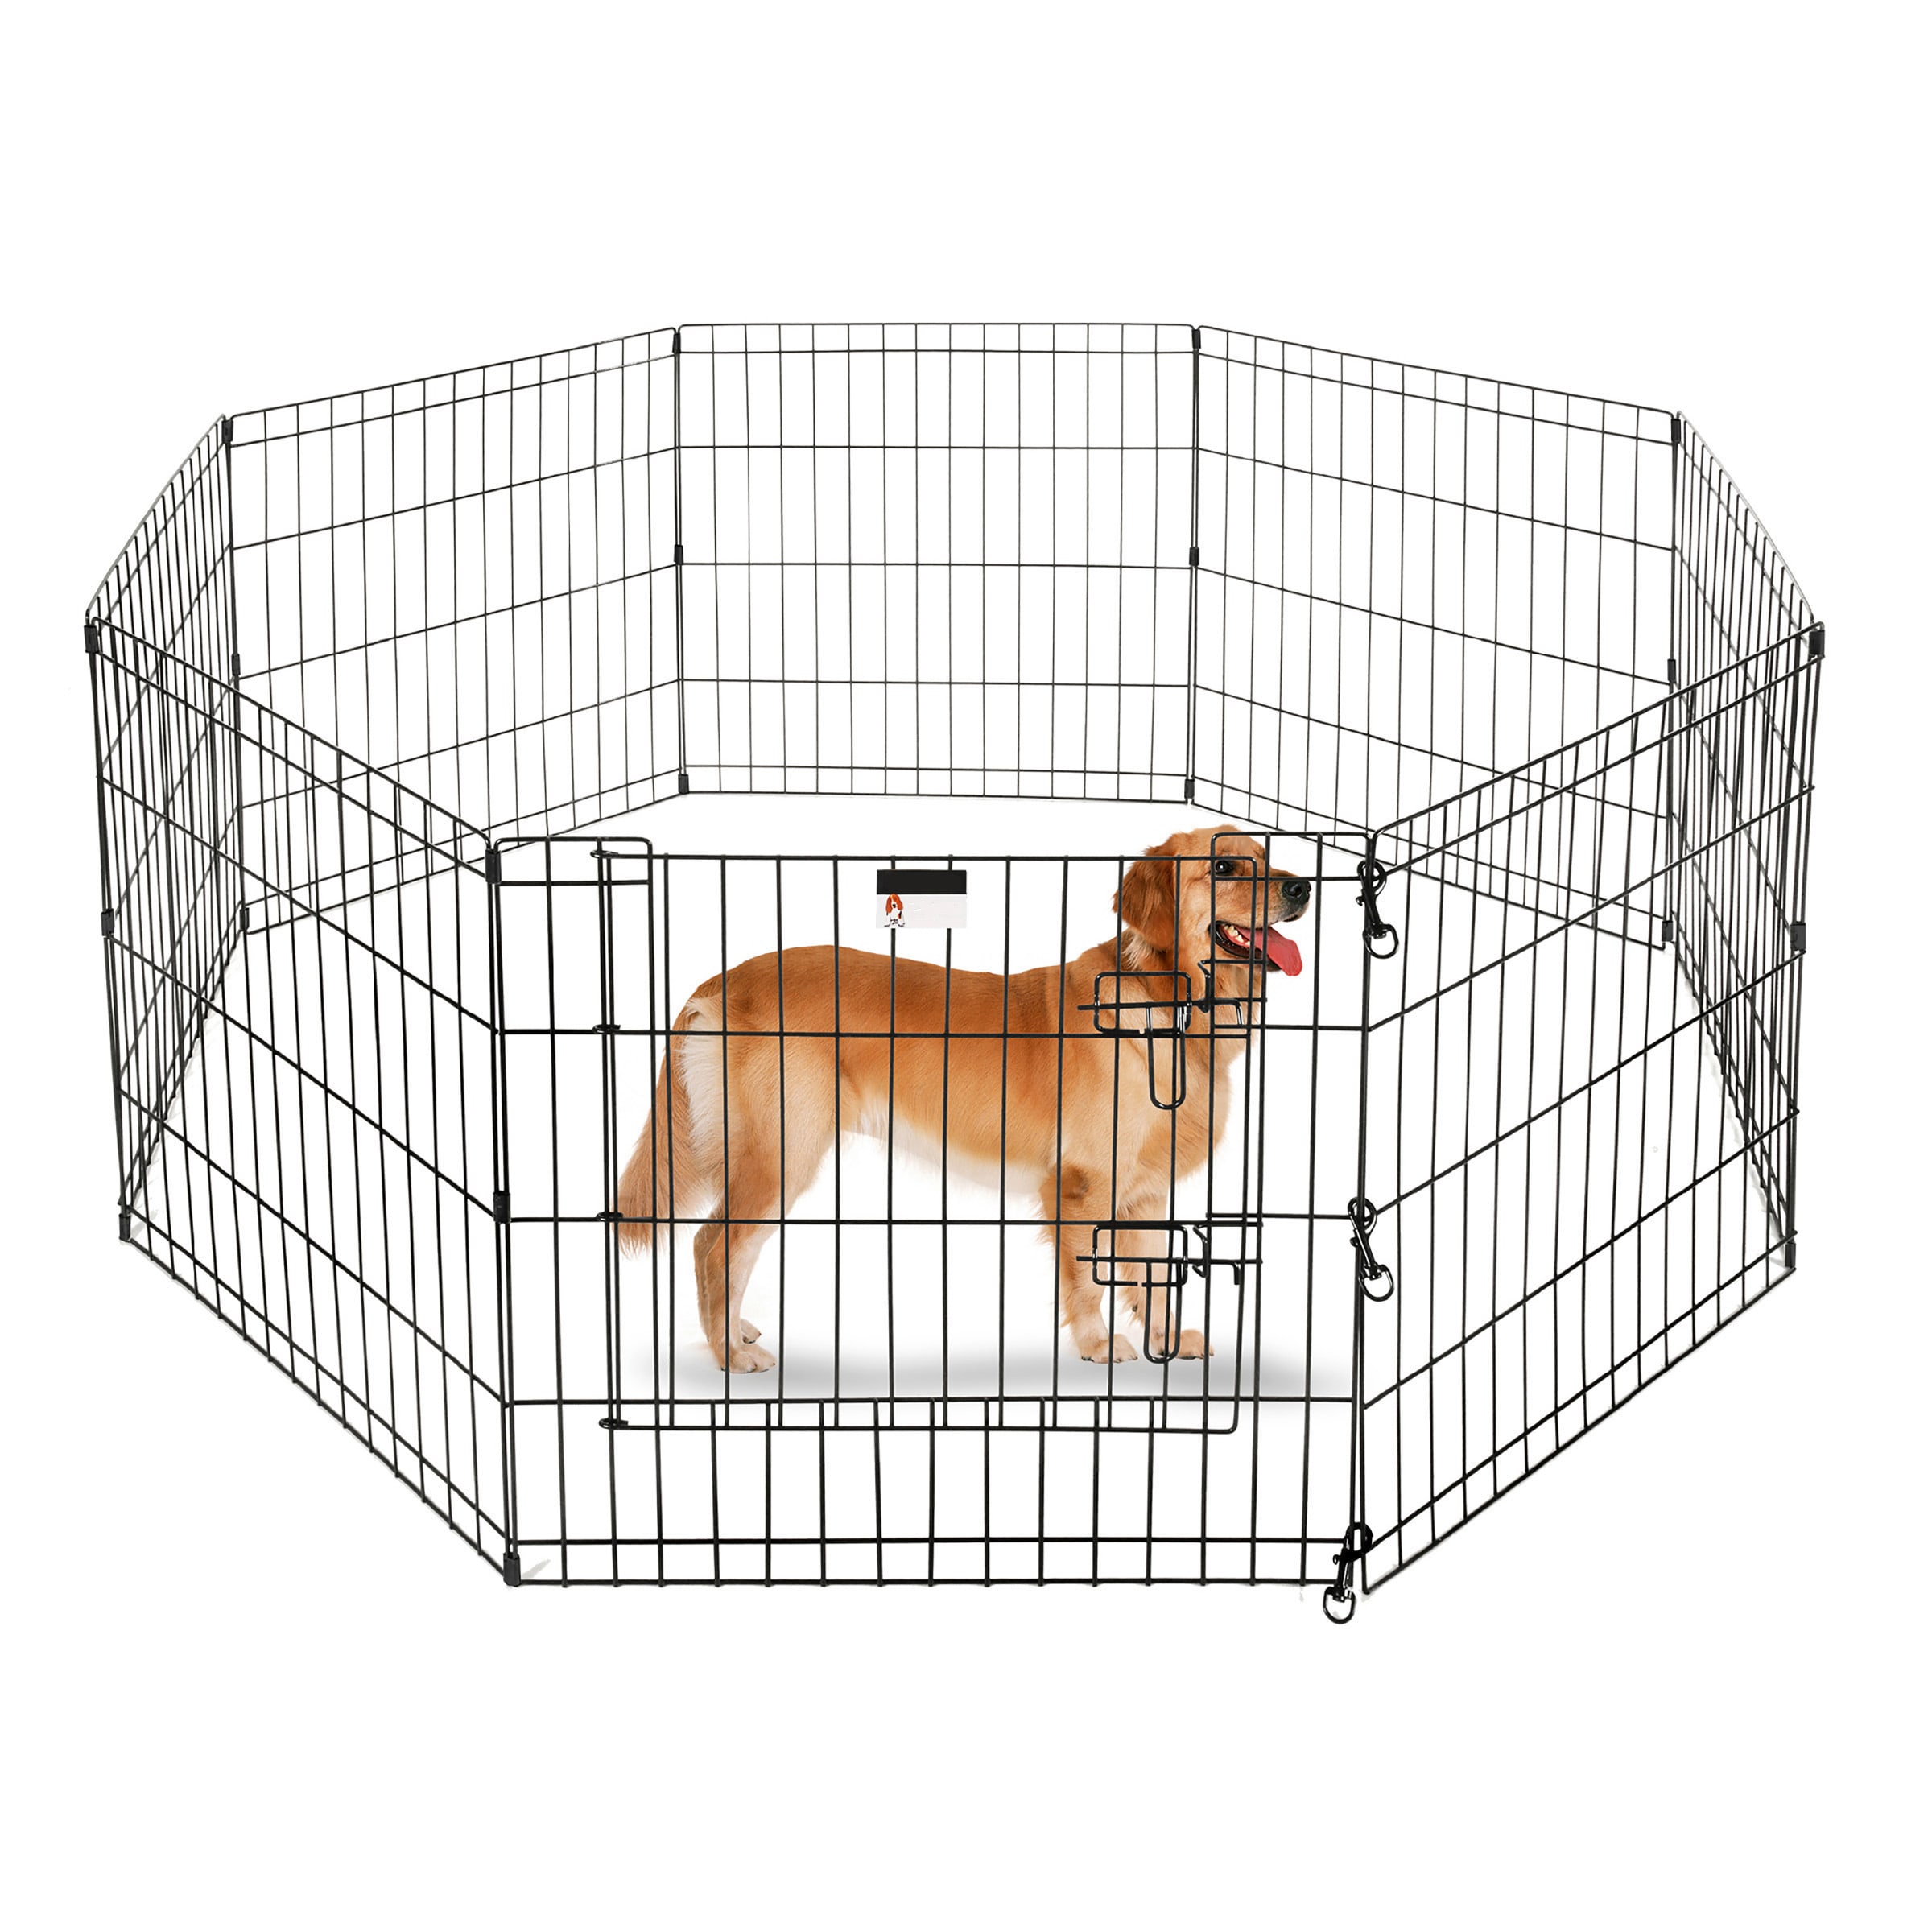 Pet Exercise Playpen Collection 8 Panel Folding Indoor/Outdoor Enclosure with Gate for Dogs Puppies Cats or Small Animals by Pet Trex 